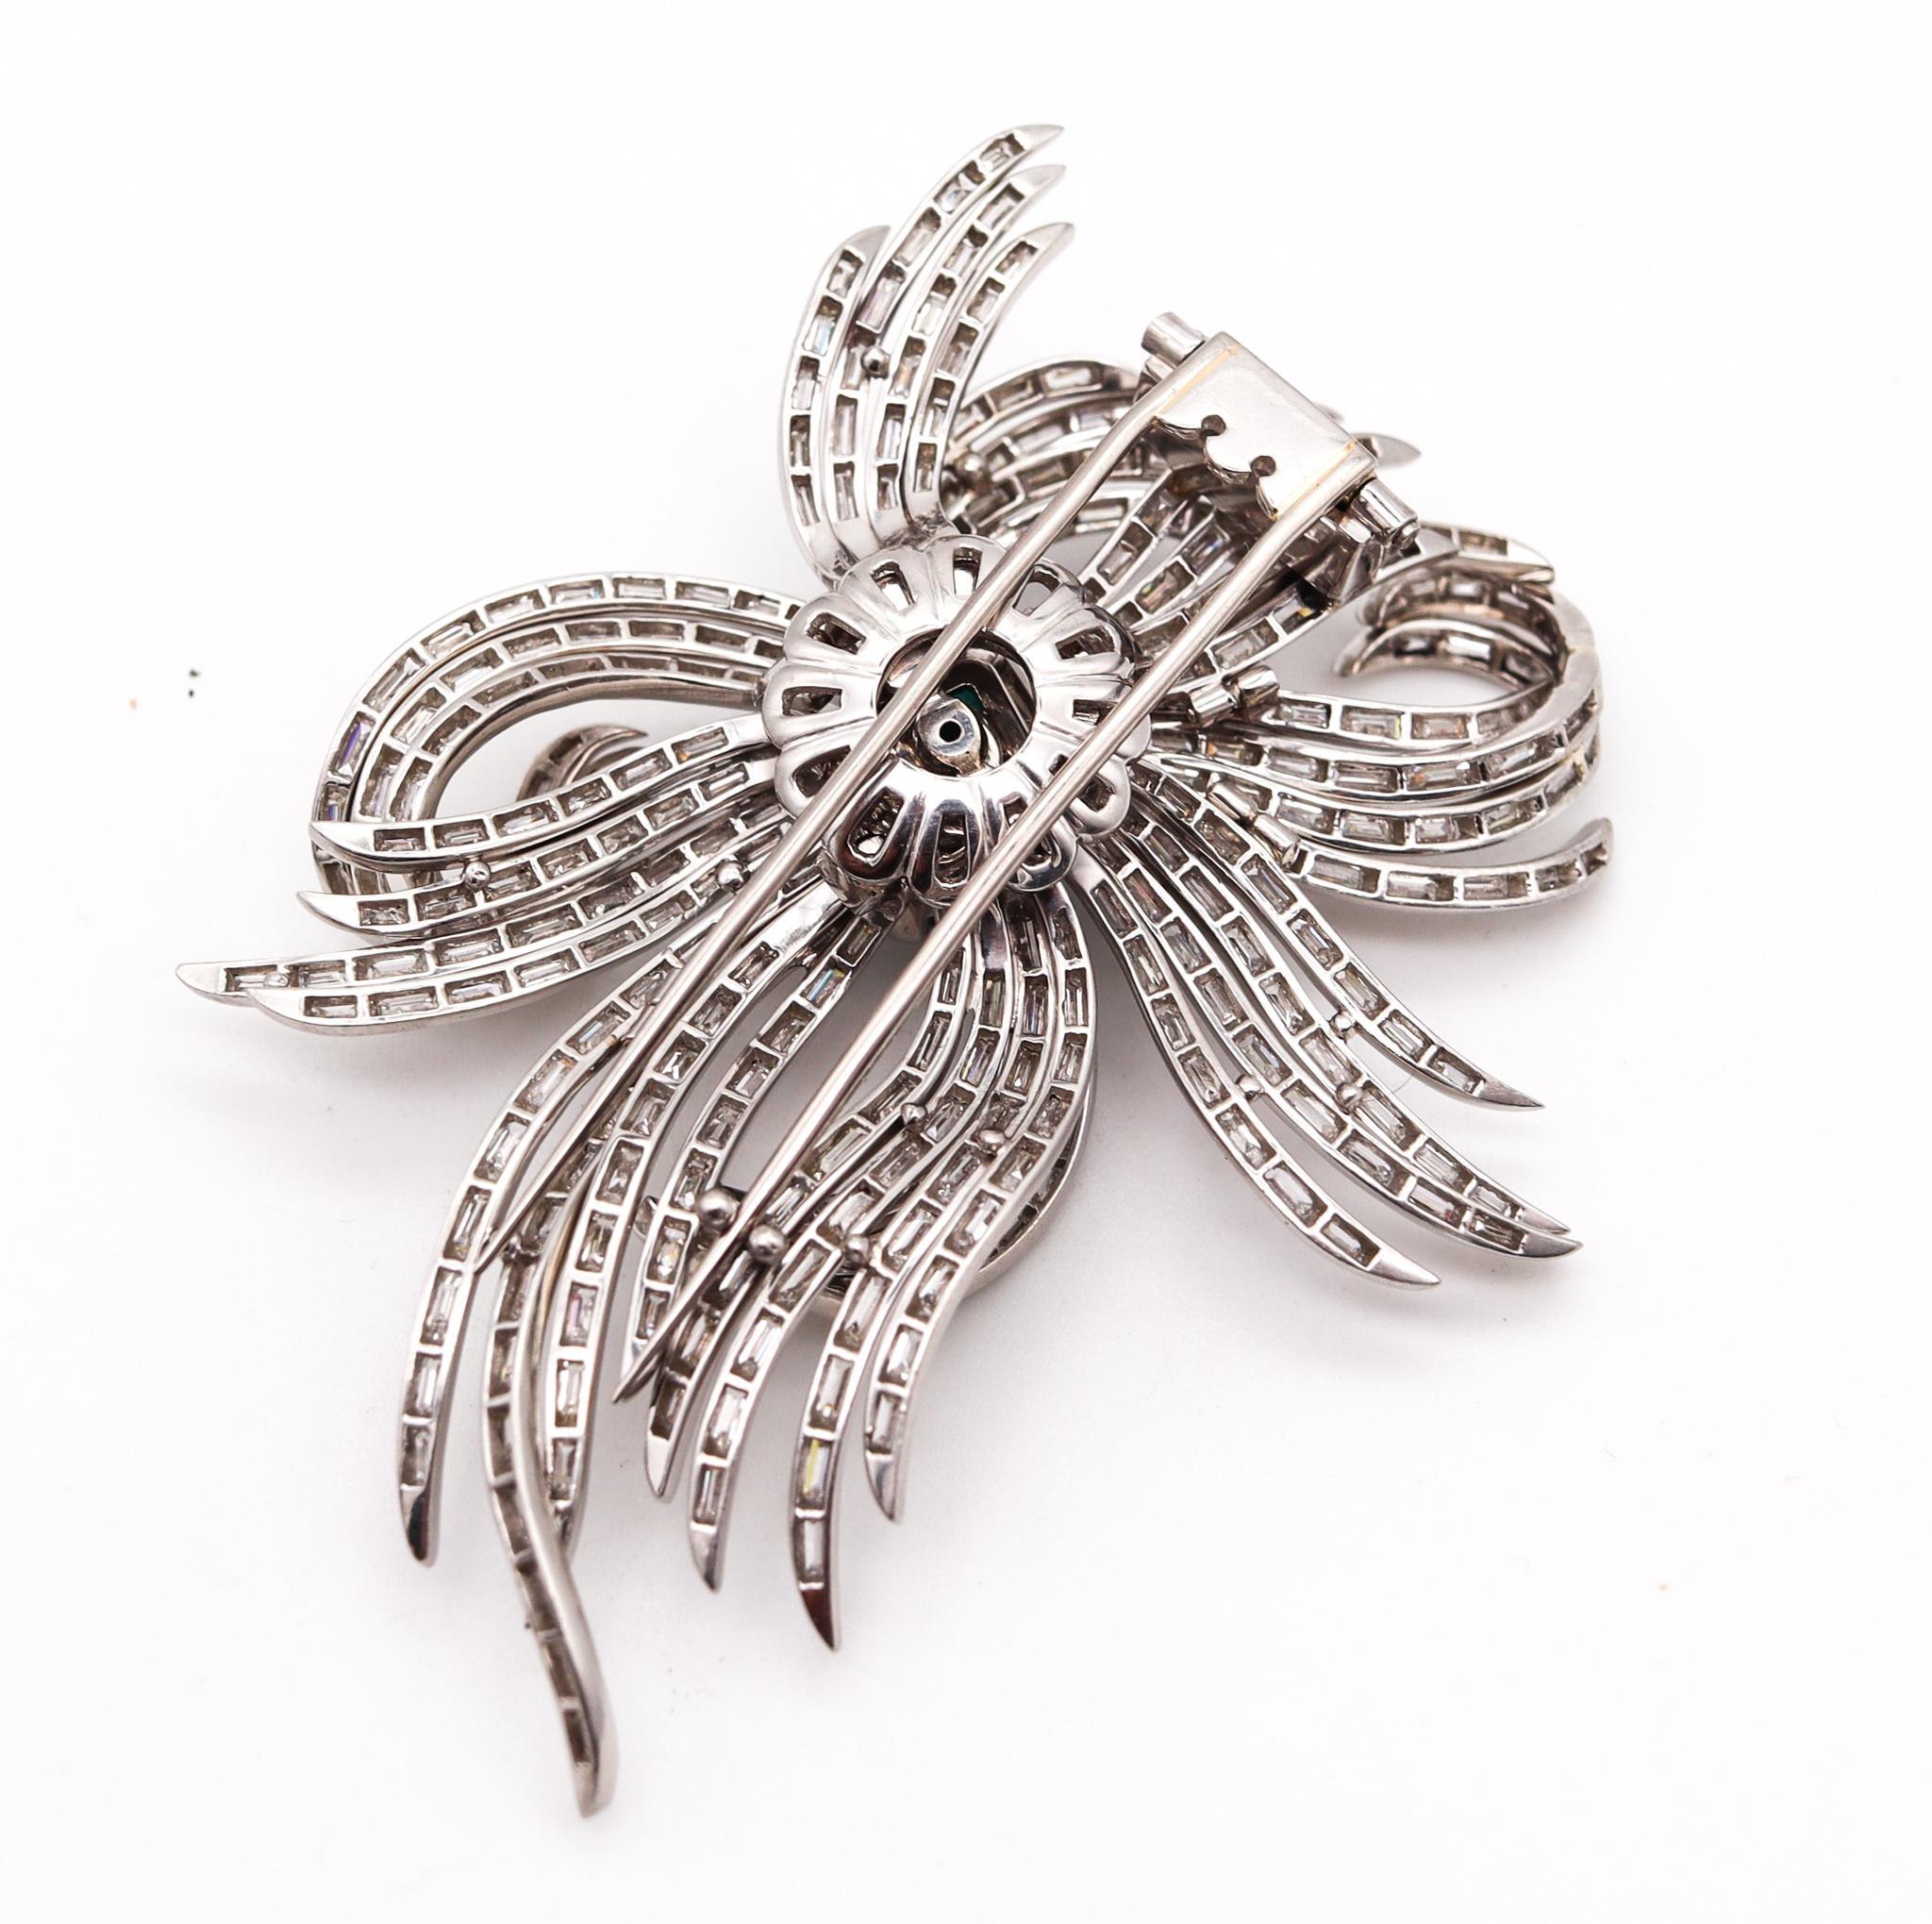 Baguette Cut Art Deco 1935 Fabulous Brooch In Platinum With 17.72 Ctw In Diamonds And Emerald For Sale